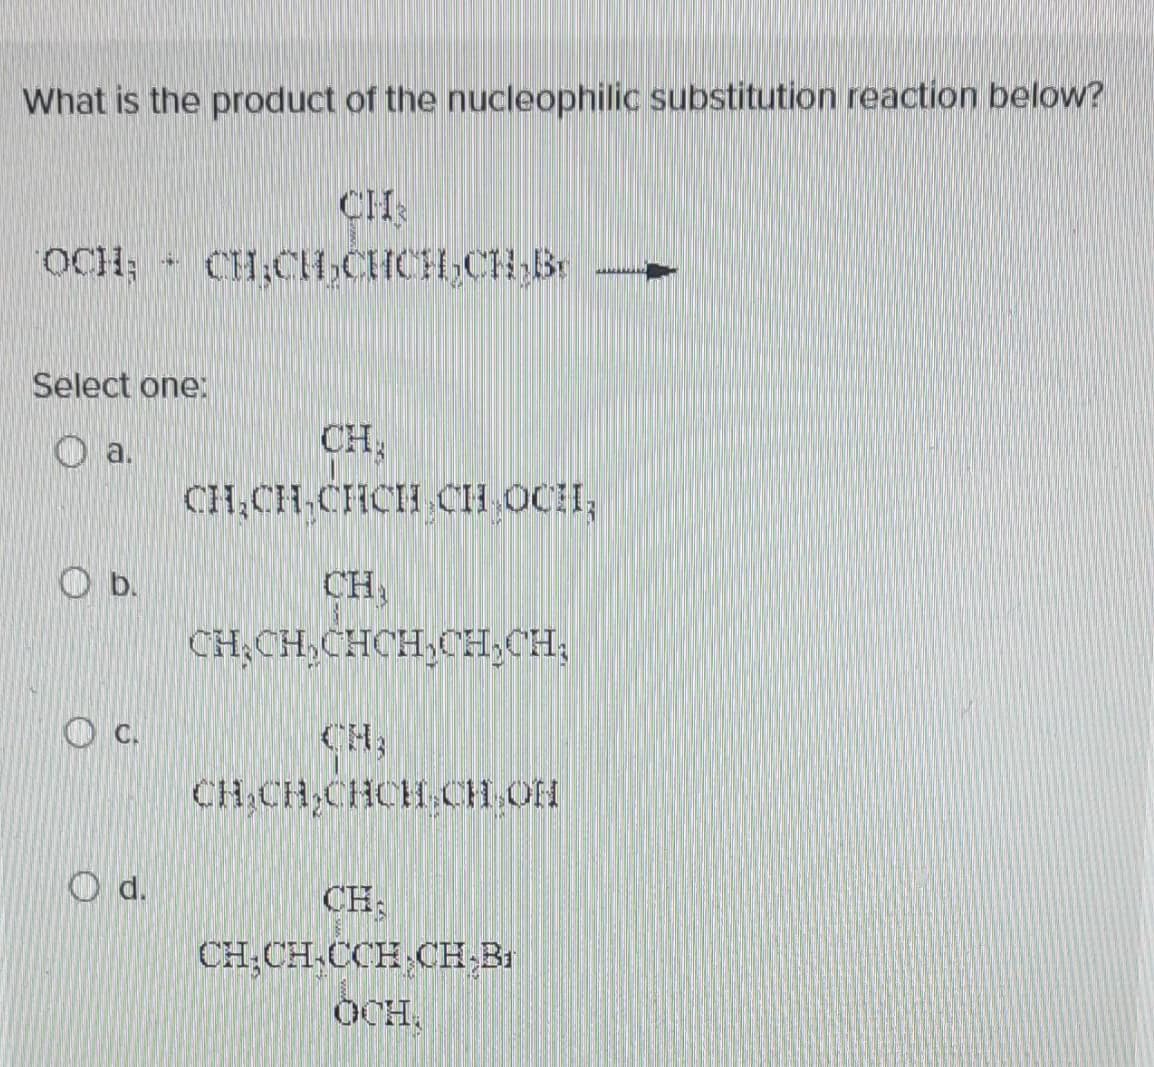 What is the product of the nucleophilic substitution reaction below?
OCH;
a.
Select one:
b.
C.
4.
d.
CHR
CHICH.CHCH-CH₂Br
CH₂
CH₂CH CHCH CH OCHI,
CH,
CH₂CH.CHCH₂CH₂CH₂
CH₂CH CHCH.CH OH
CH
CH CH CCH CH₂B₁
OCH.